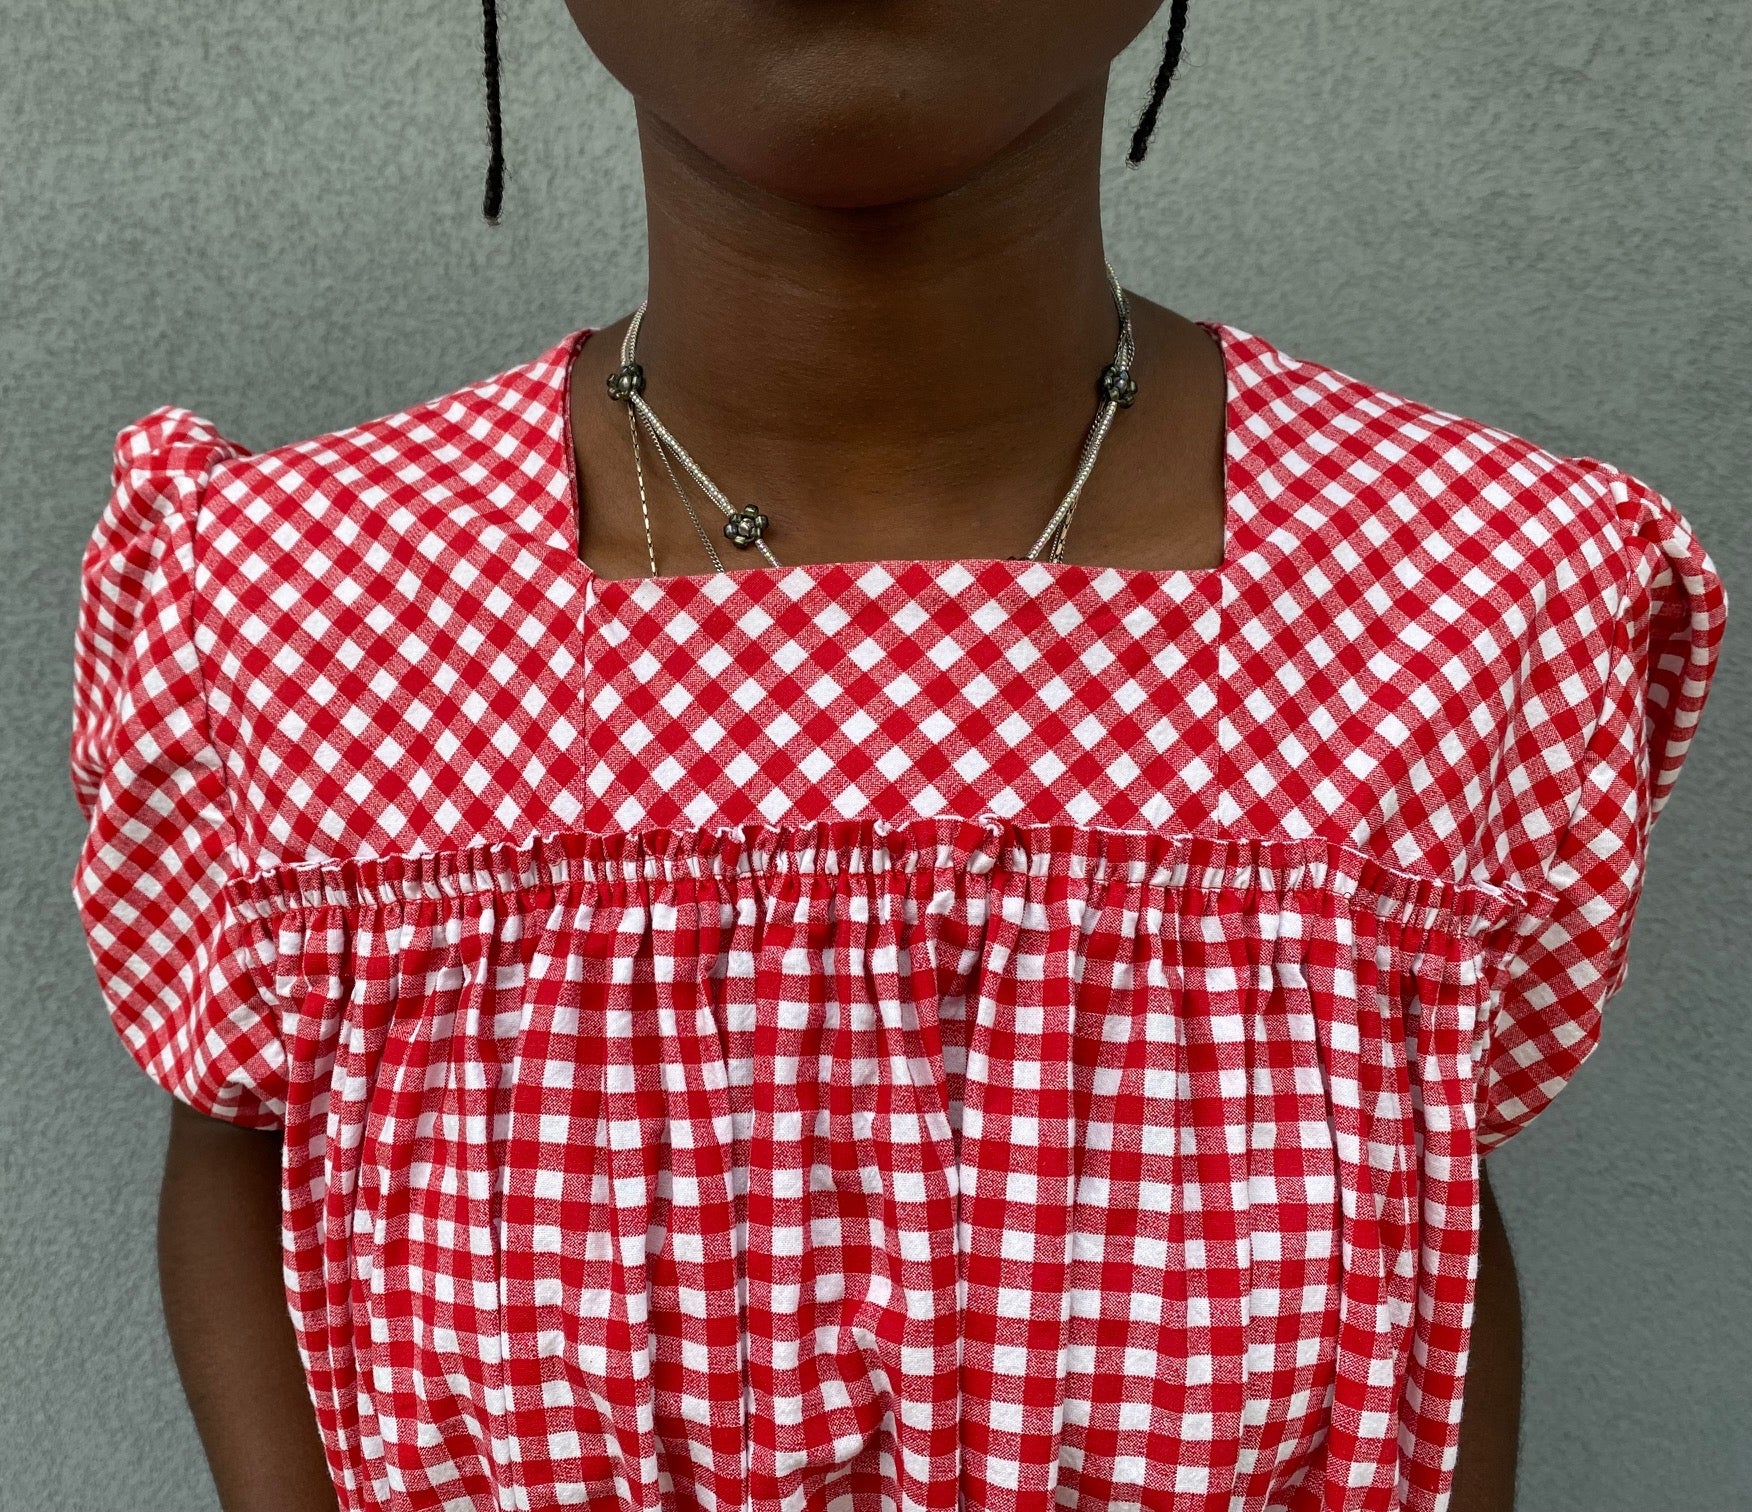 Close up of the bodice of Woman standing in front of grey wall wearing a red and white check dress with short puffed sleeves and a bottom flounce.